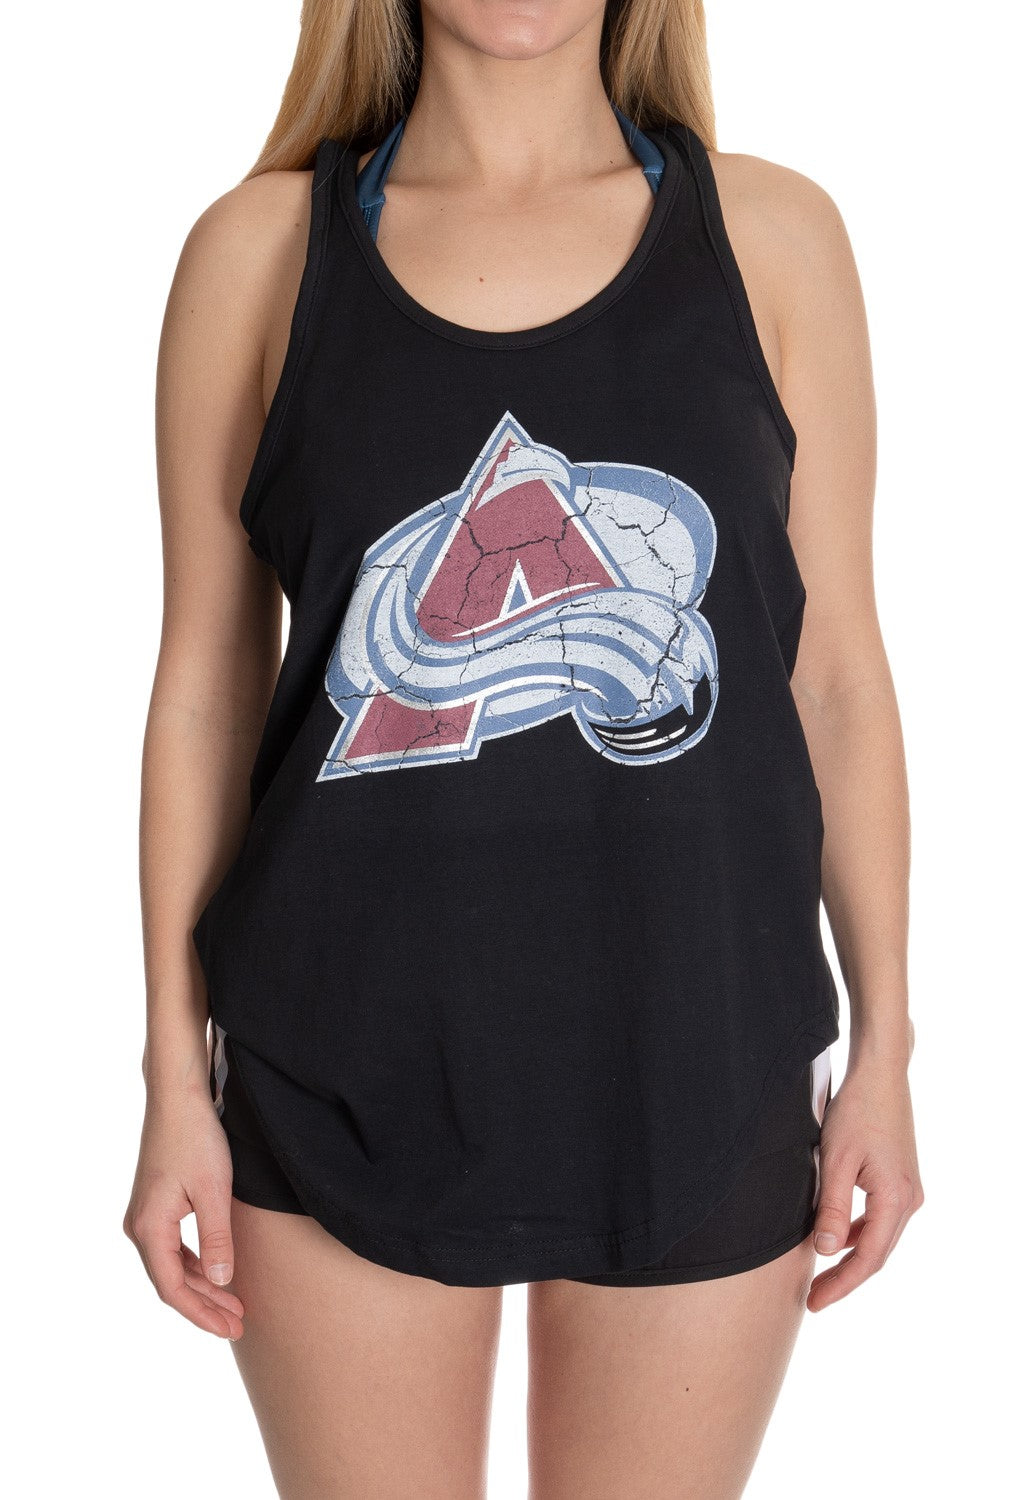 Colorado Avalanche Distressed Flowy Tank Top Front View. lack Racerback Tank With Distressed Avalanche Logo In Middle Of Chest.